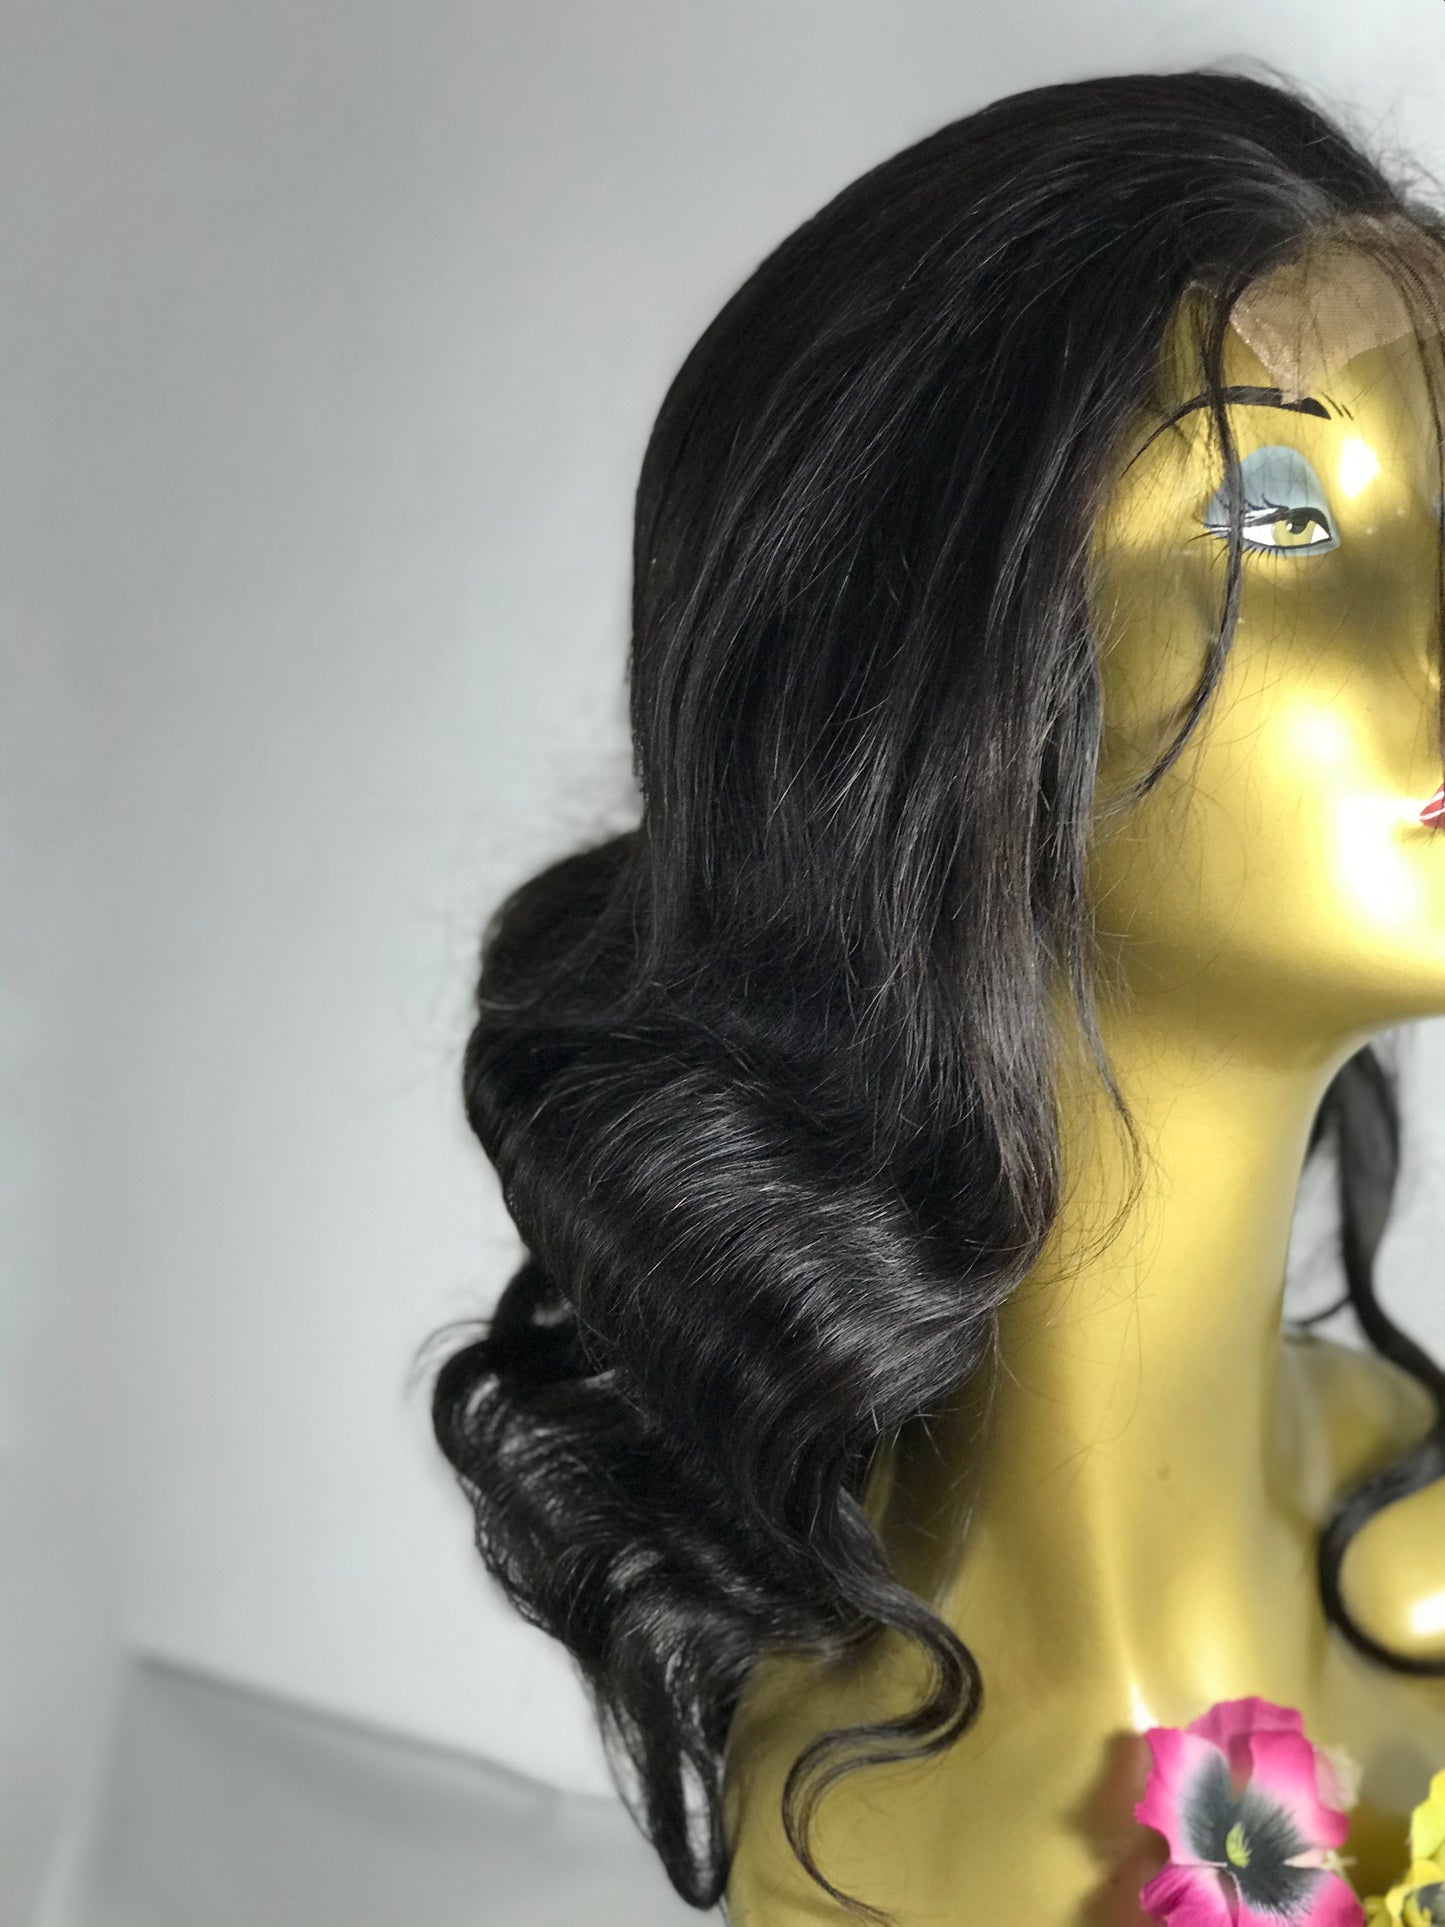 #Custom Made #Wig 14 inch Body Wave Human Hair Lace Front Hair System Finally, Affordable Already #CustomFitting Natural Looking #Humanhair #Hairloss Solutions.This is for you that want A really good quality, realistic, human hair wig hair system that actually looks bomb.